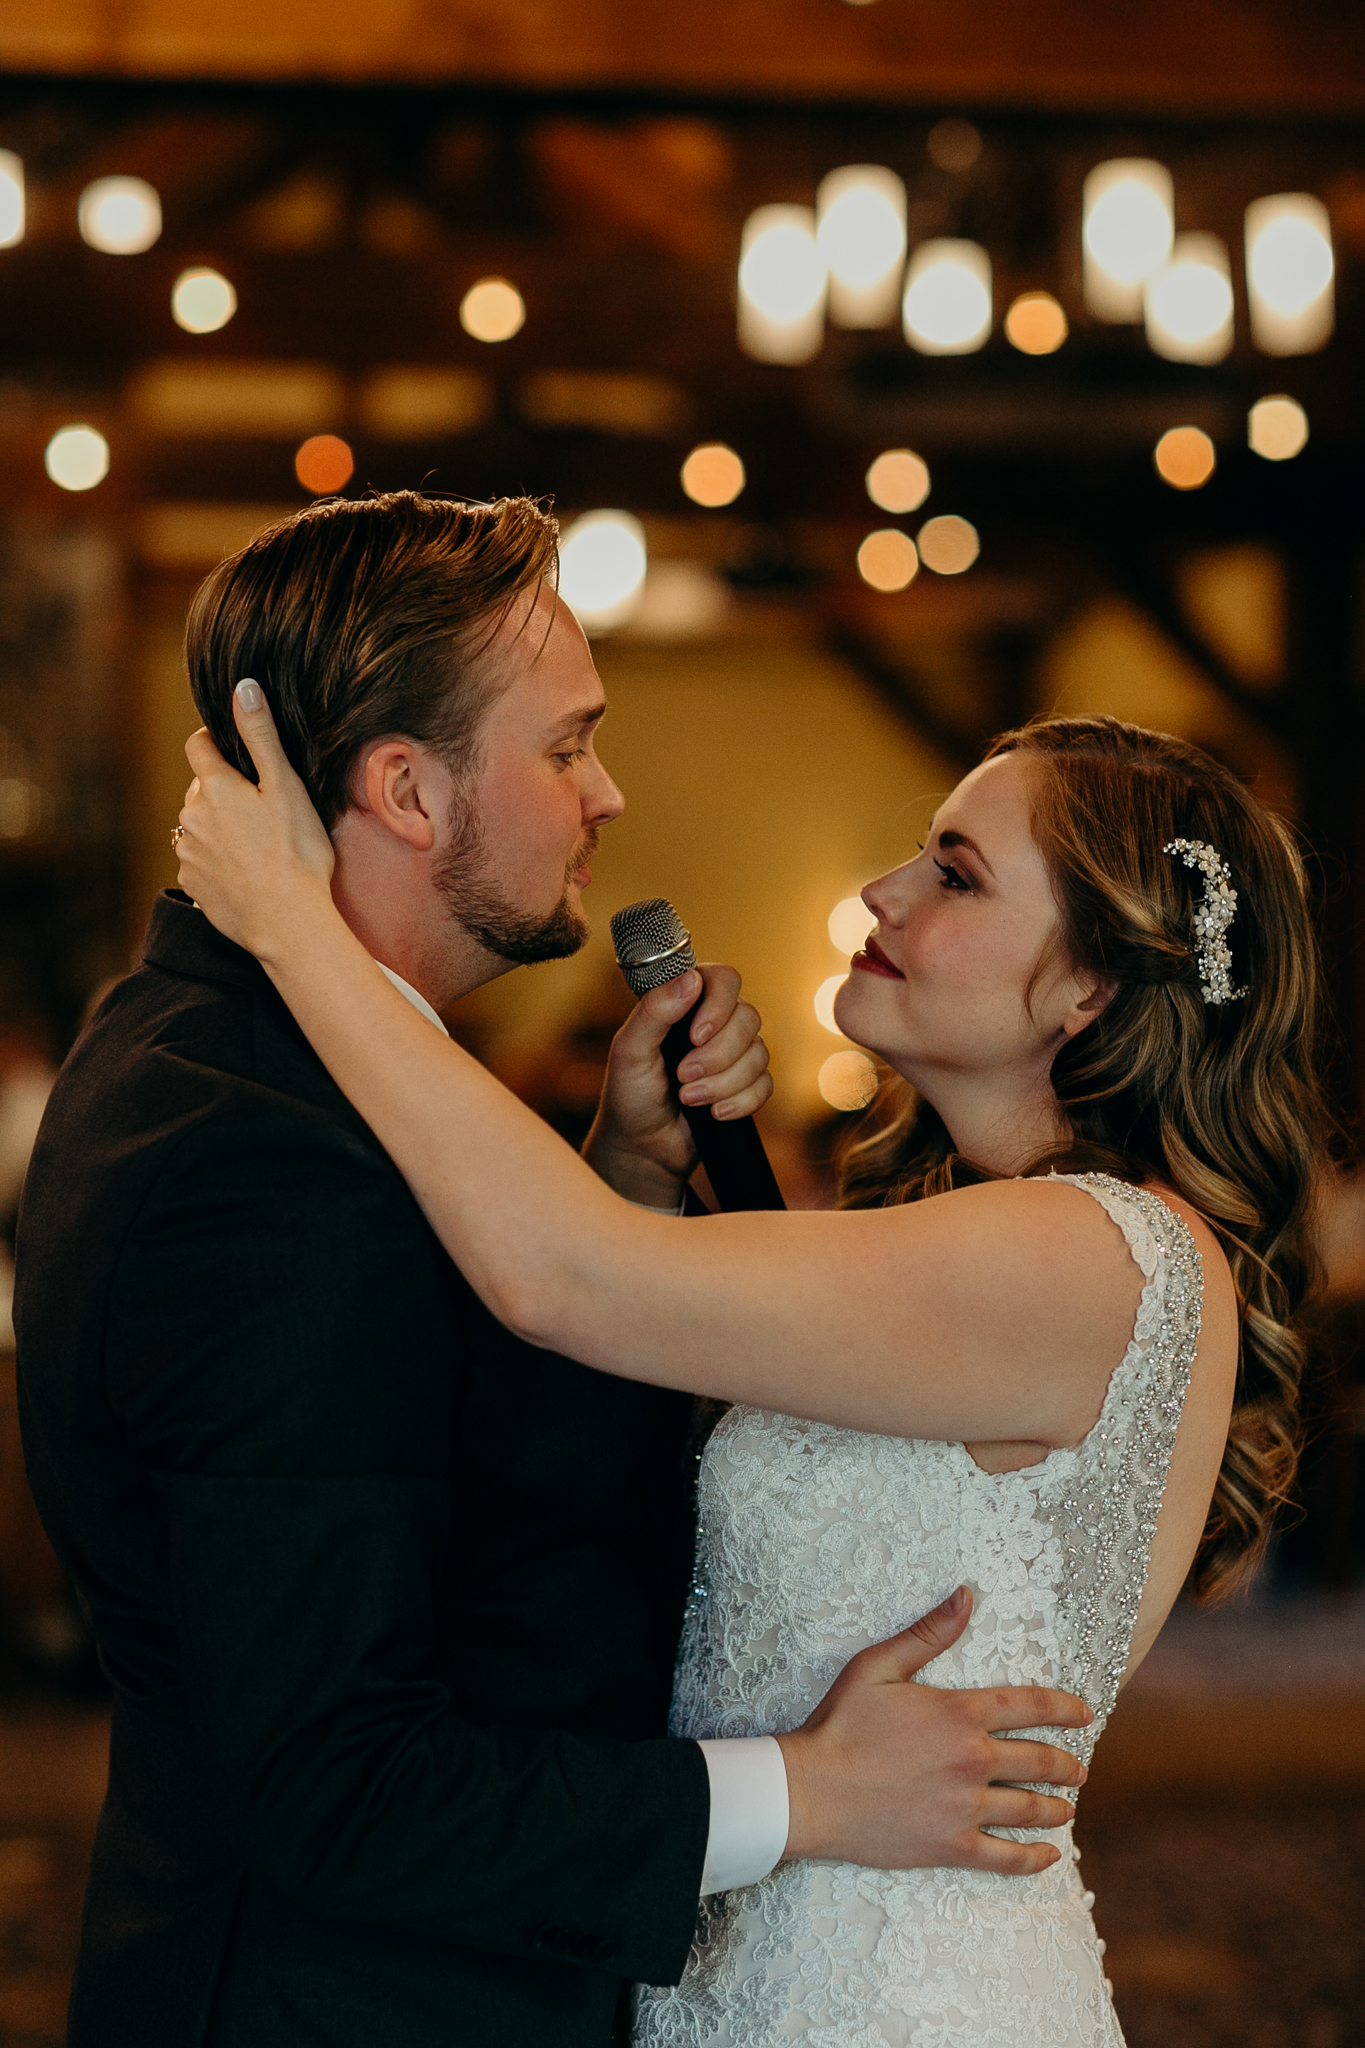 Bride and groom dance during wedding reception at Silvertip Resort in Canmore Alberta romantic wedding photograph MN